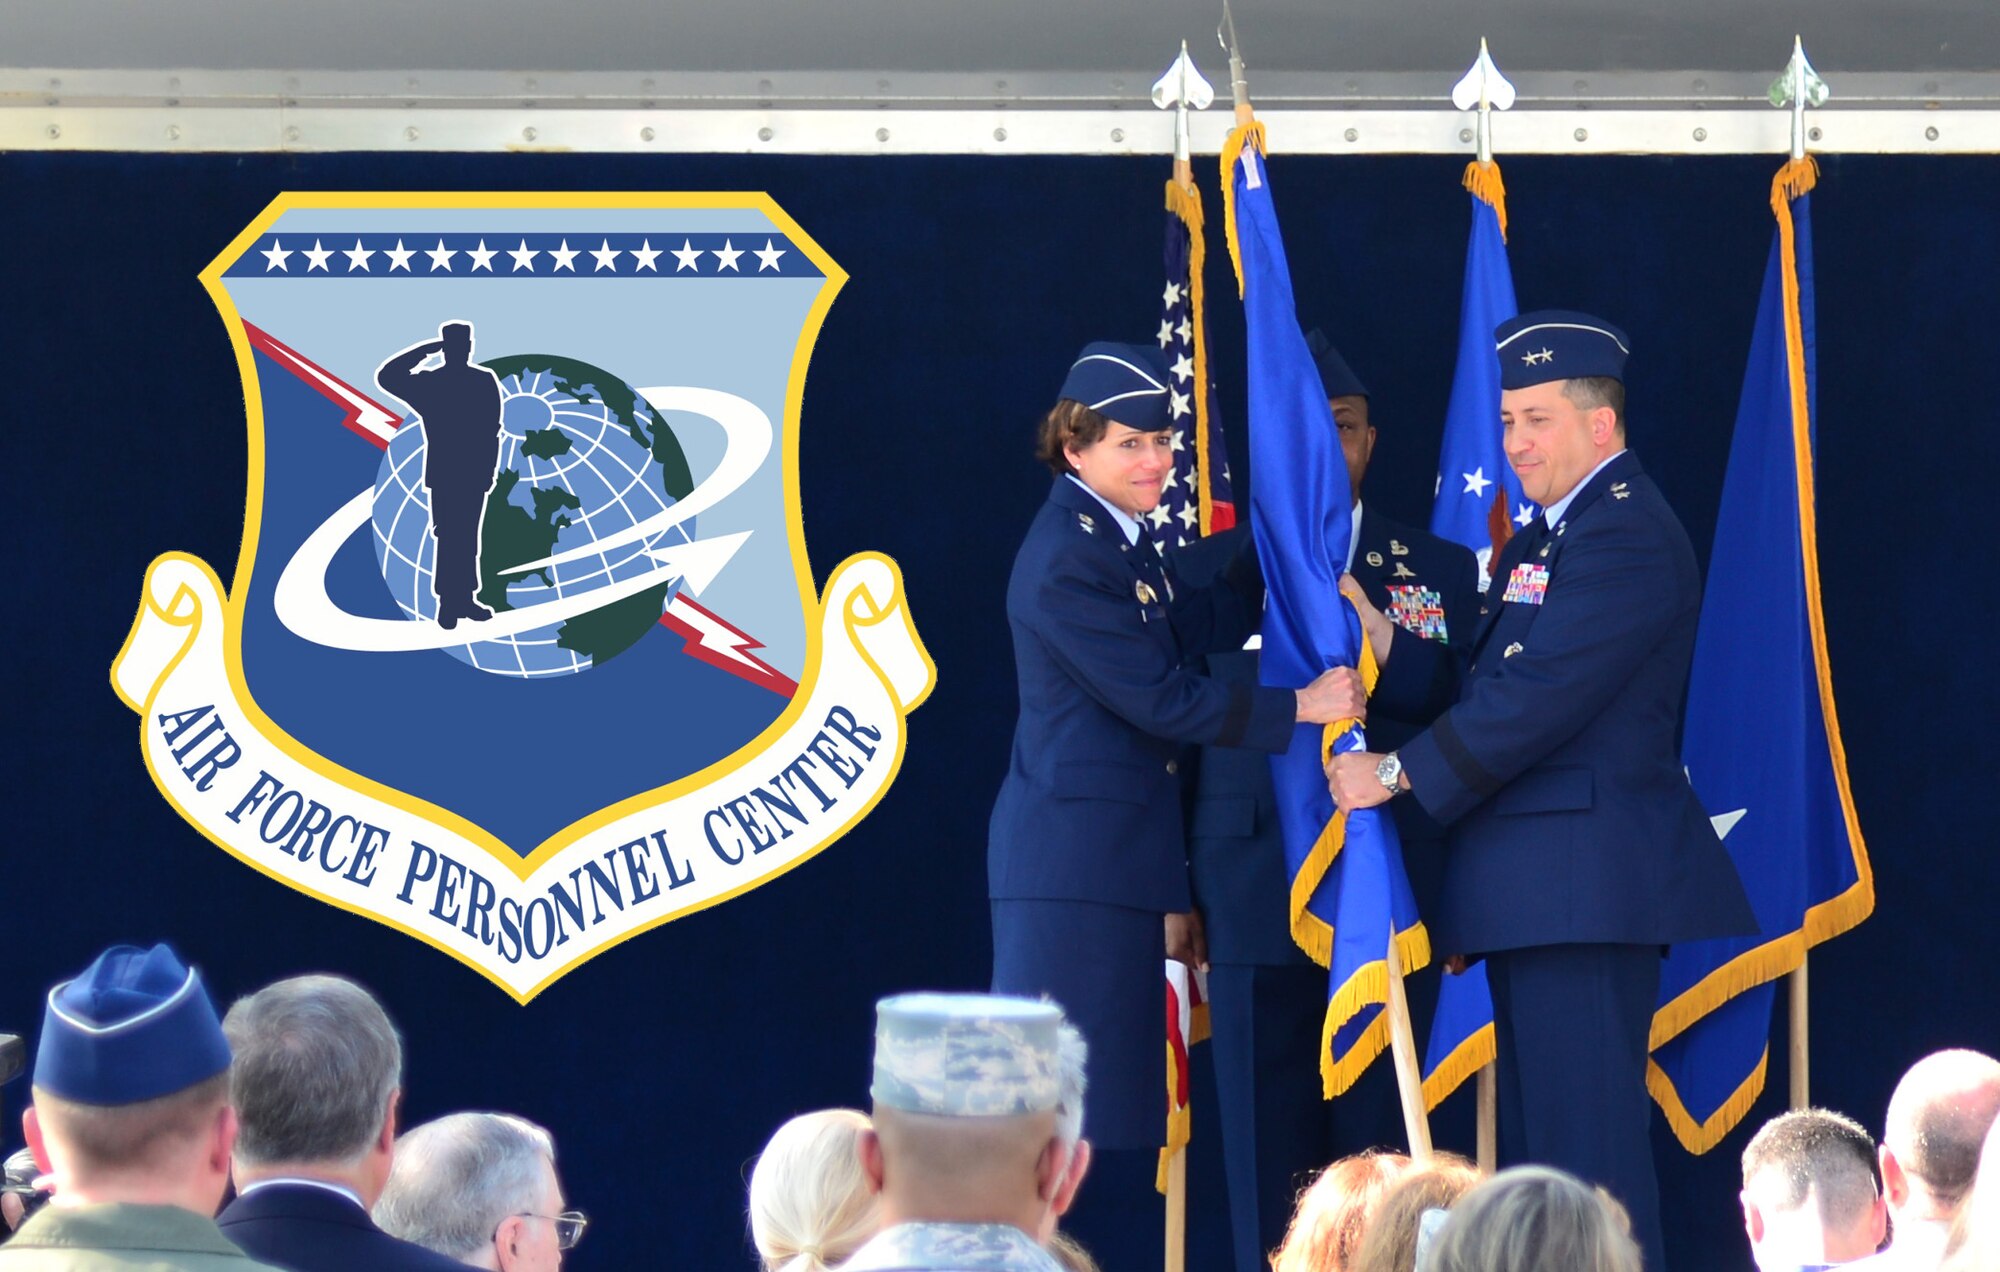 U.S. Air Force Lt. Gen. Gina Grosso, deputy chief of staff for manpower, personnel and services, presents the headquarters guidon to Maj. Gen. Brian Kelly, incoming Air Force Personnel Center commander, during a change of command ceremony June 23, 2017 at Joint Base San Antonio-Randolph, Texas. Kelly assumed this role as Maj. Gen. Peggy Poore formally relinquished command after several years of dedicated service. (U.S. Air Force photo by Staff Sgt. Alexx Pons)